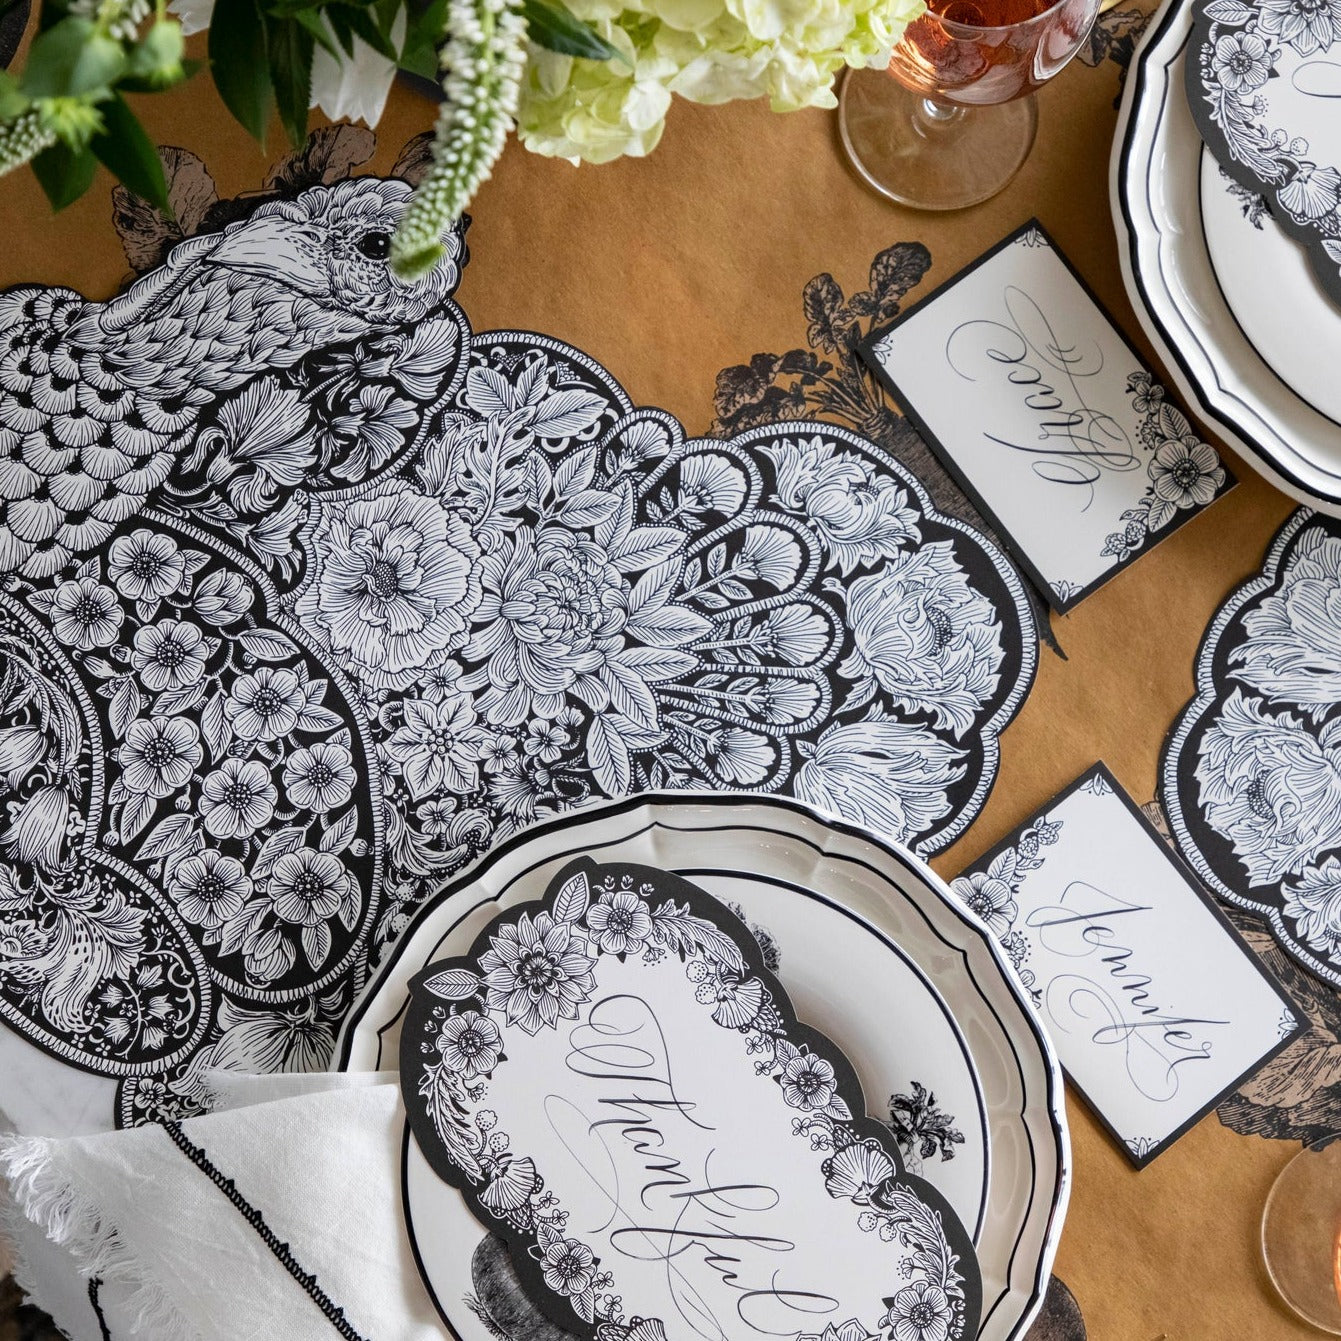 Create an autumnal Thanksgiving table with stylish black and white place settings. Enhance the festive atmosphere with the exquisite Hester &amp; Cook Die-cut Ebony Harvest Turkey Placemat.